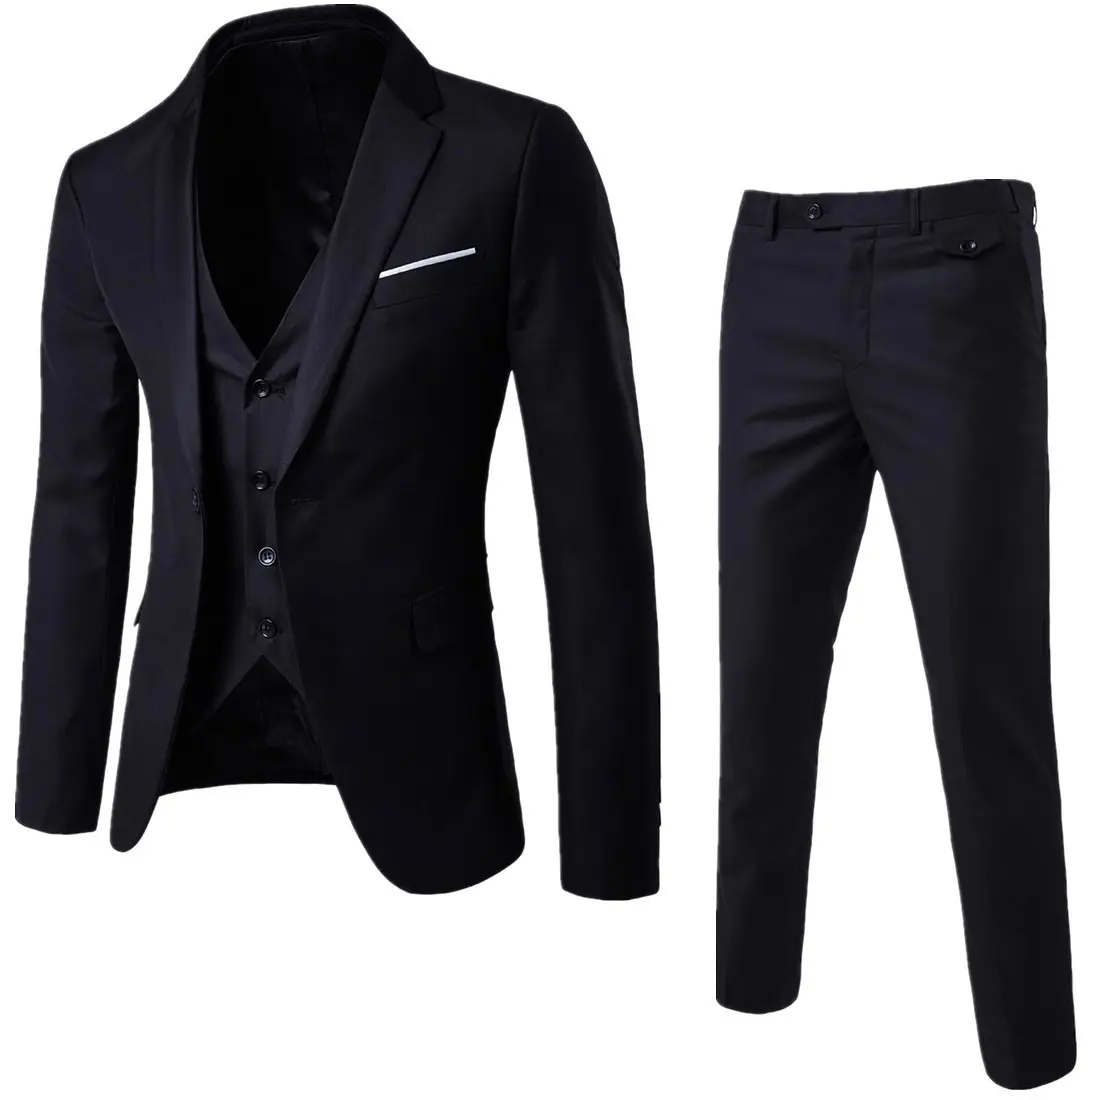 Autumn And Winter Men'S Suits Three-Piece Suits Groom'S Wedding Suits Formal Professional Wear For Men